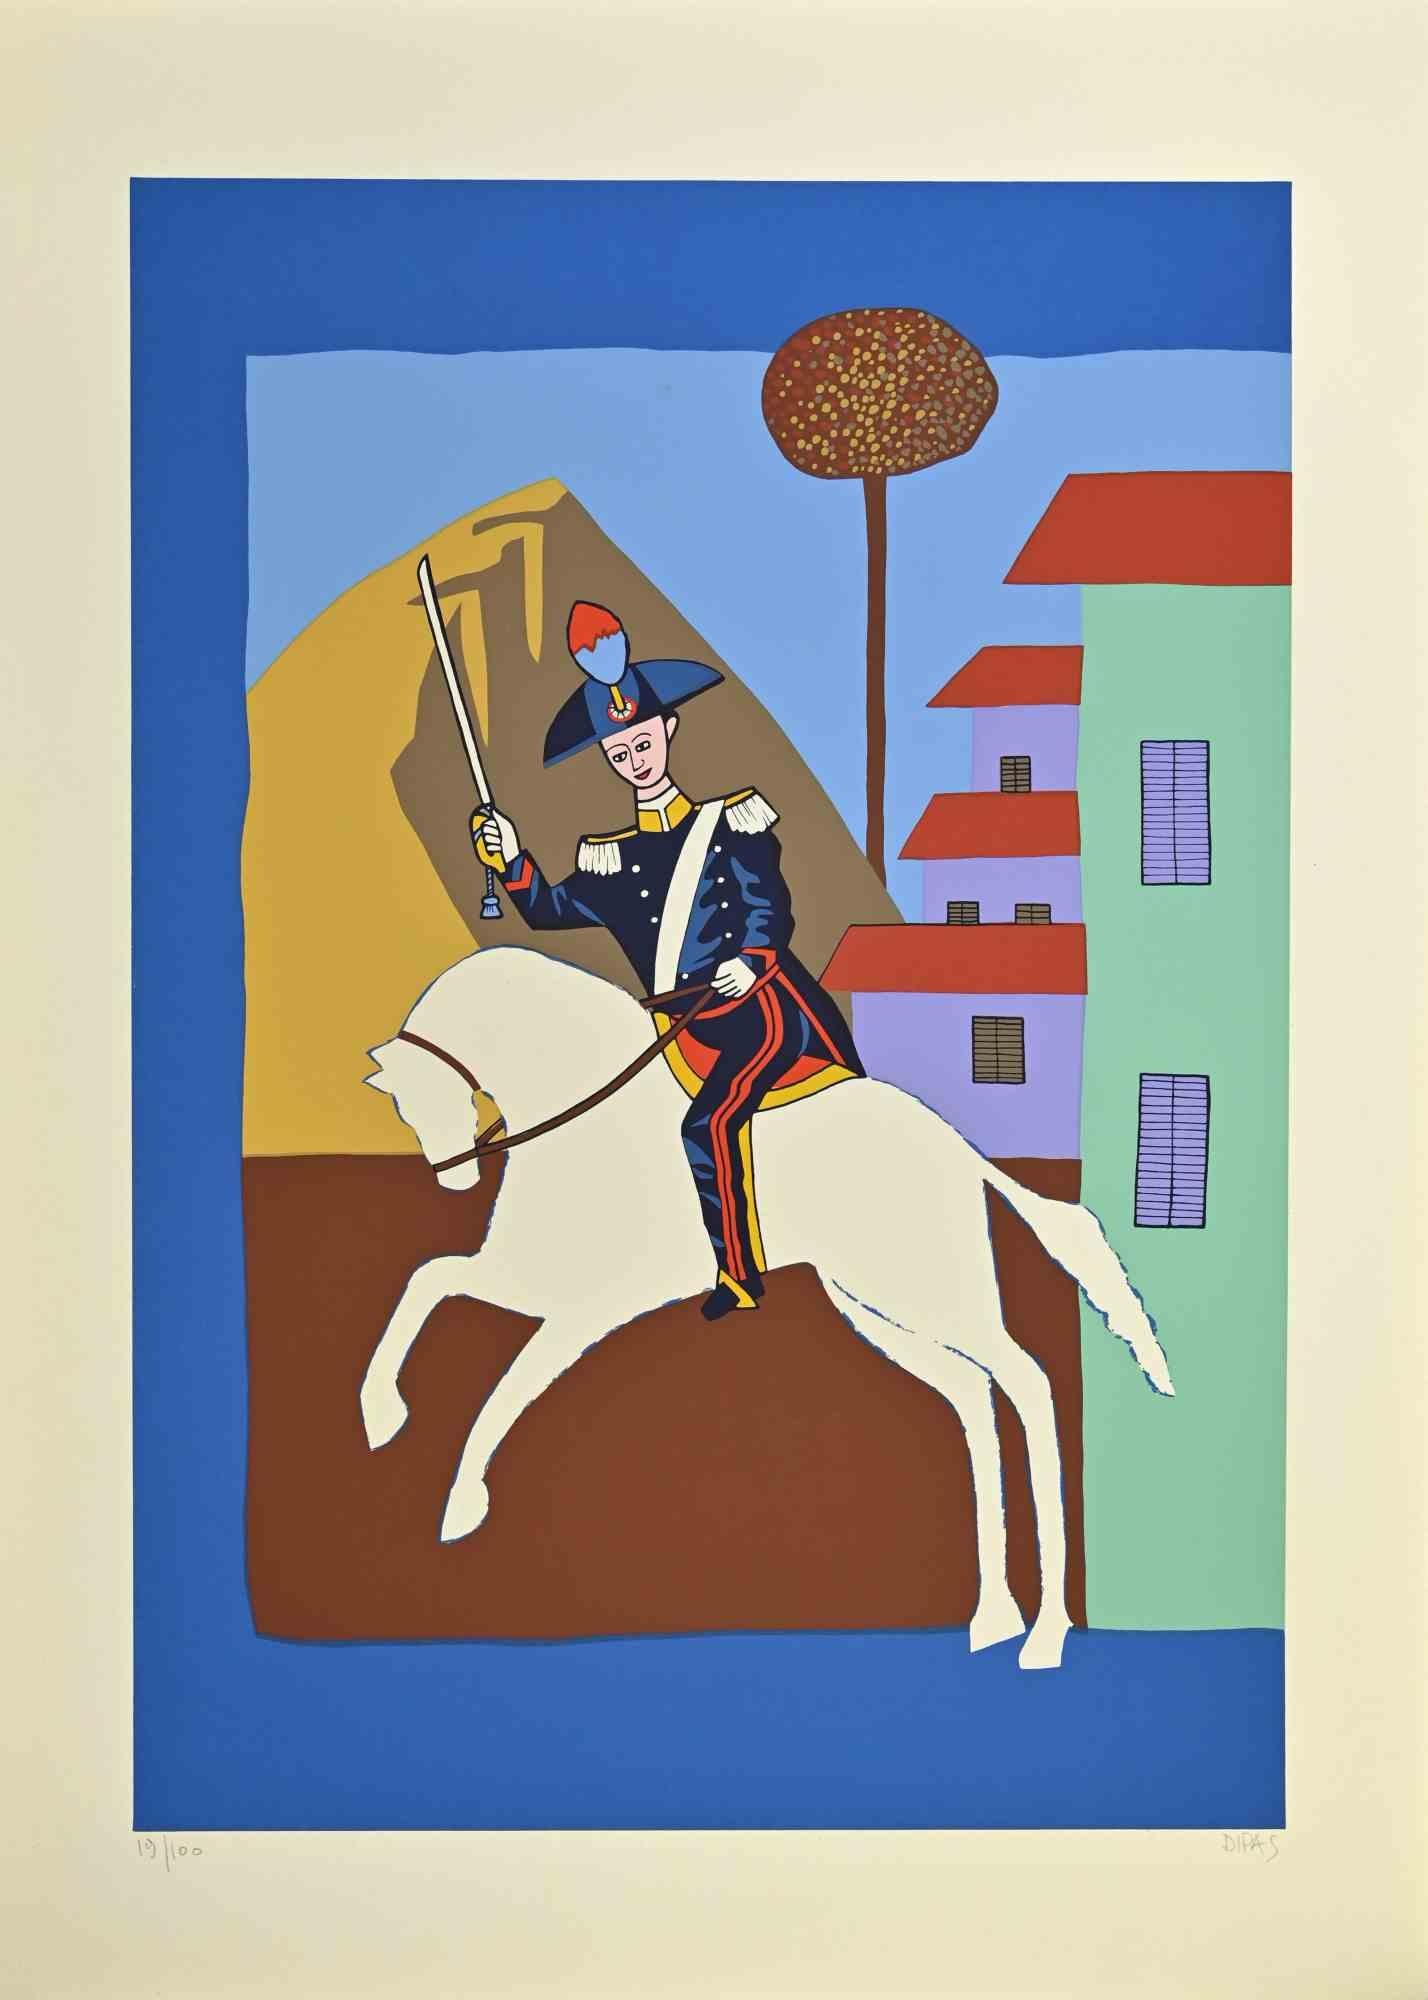 Carabinieer on horse is a contemporary artwork realized by the artist Dipas in the 1970s.

Mixed colored screen print.

Hand signed on the lower right margin.

Numbered on the lower left margin.

Edition of 19/100.